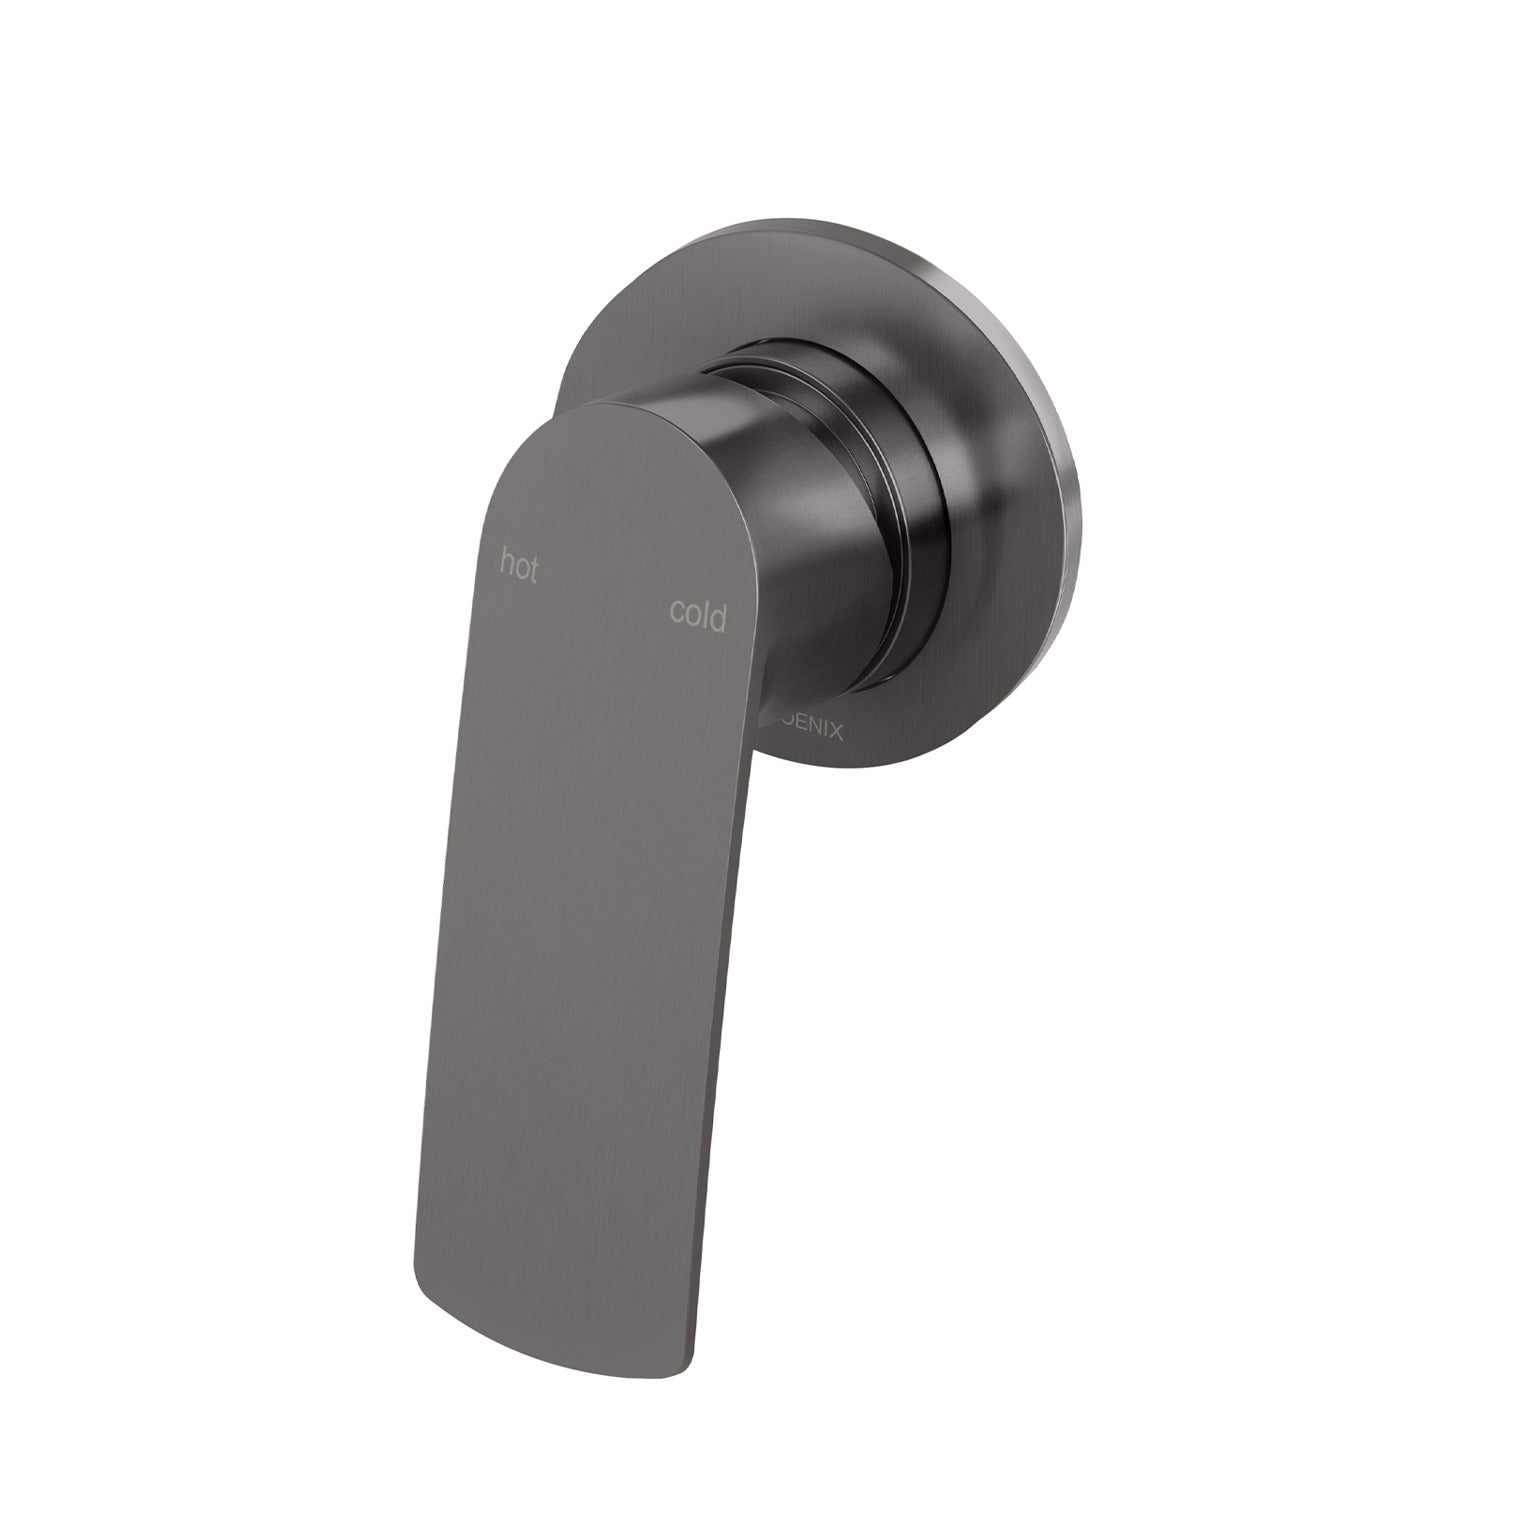 PHOENIX MEKKO SWITCHMIX WALL MIXER W/ ROUND BACKPLATE FIT-OFF AND ROUGH-IN KIT BRUSHED CARBON